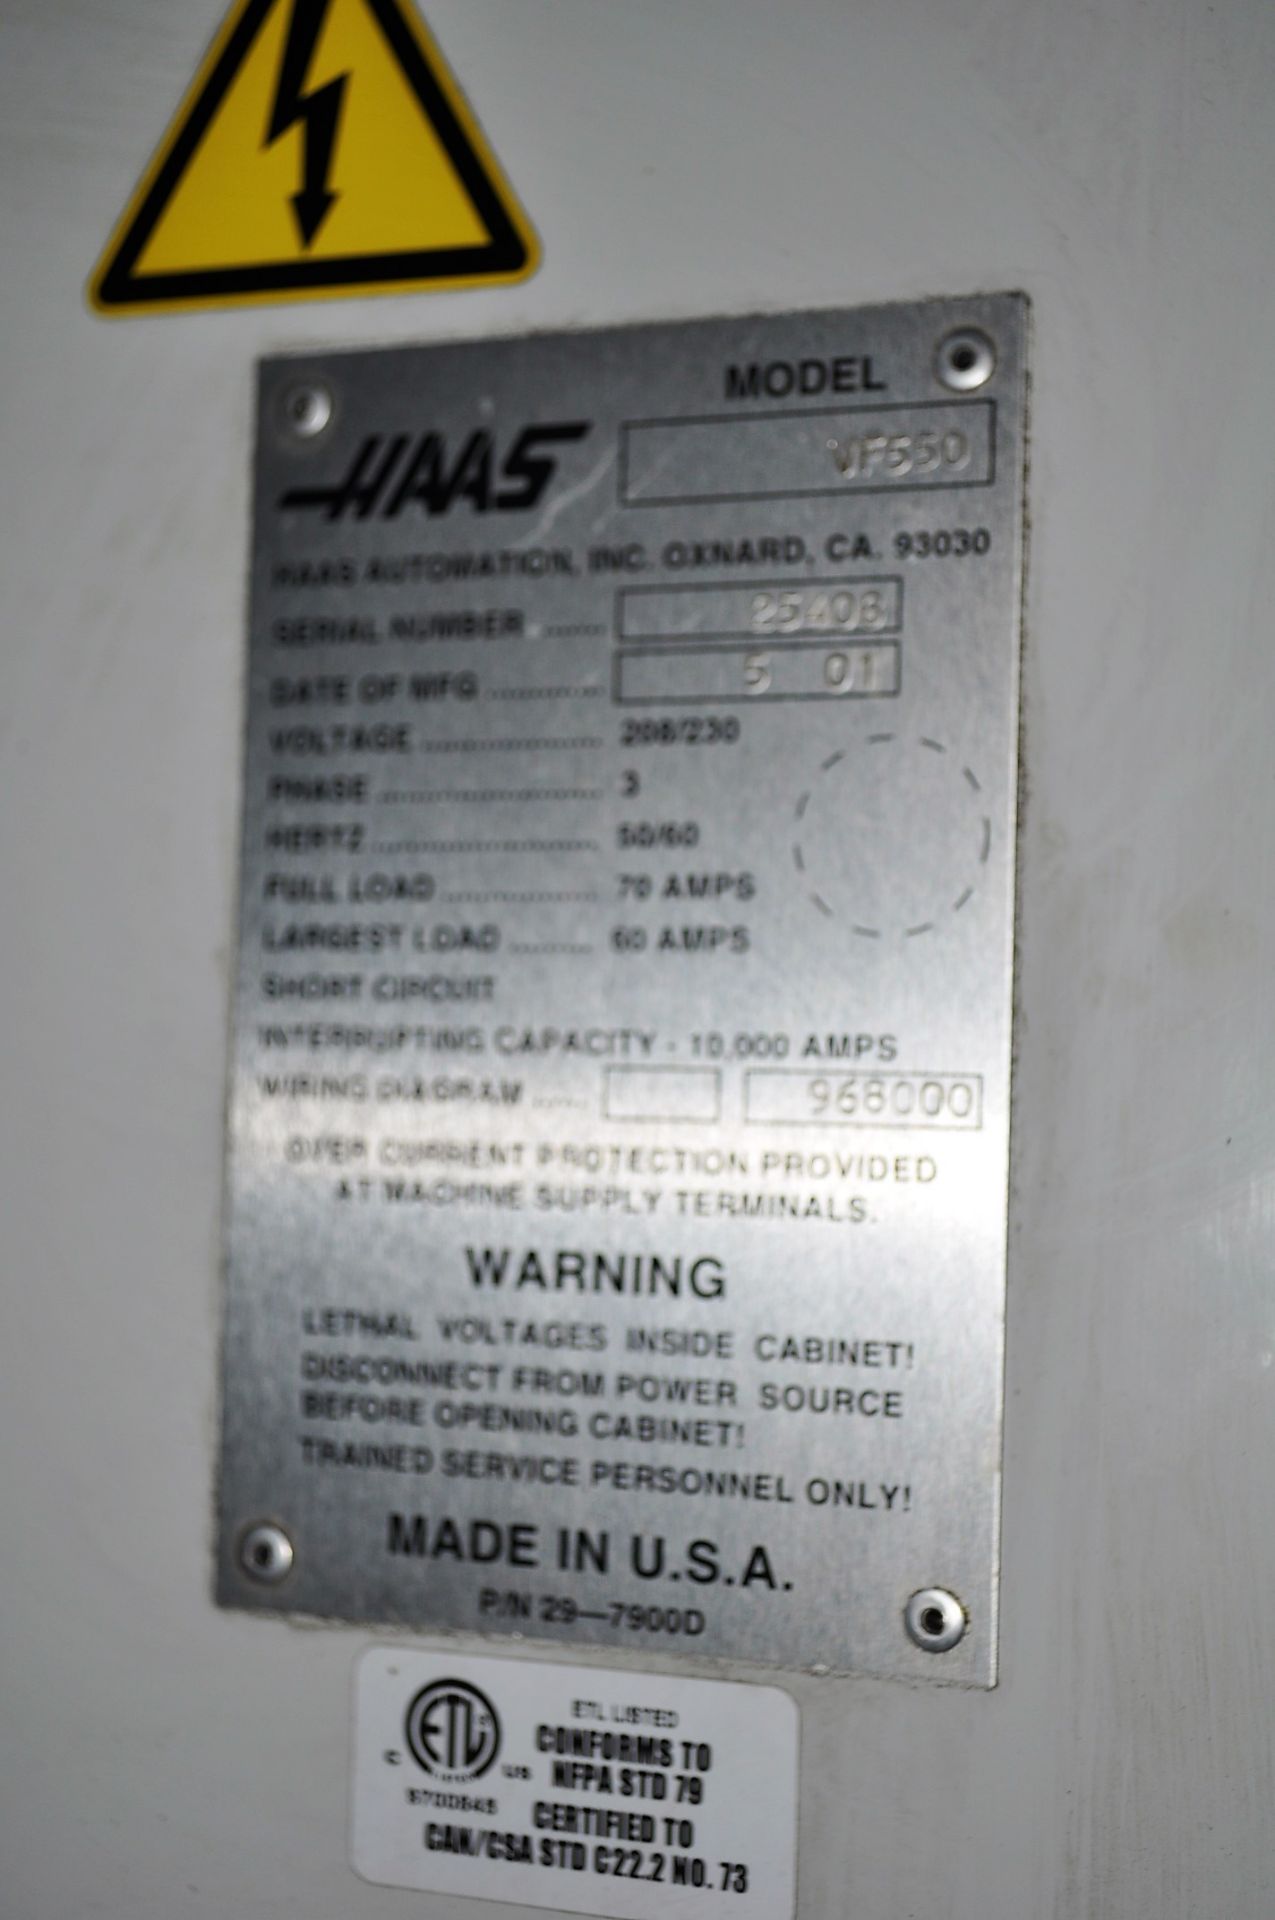 HAAS MDL. VF5-50 CNC VERTICAL MILL, WITH 62'' X 23'' TABLE, TRAVELS: X-50'', Y-26'', Z-25'', - Image 10 of 12